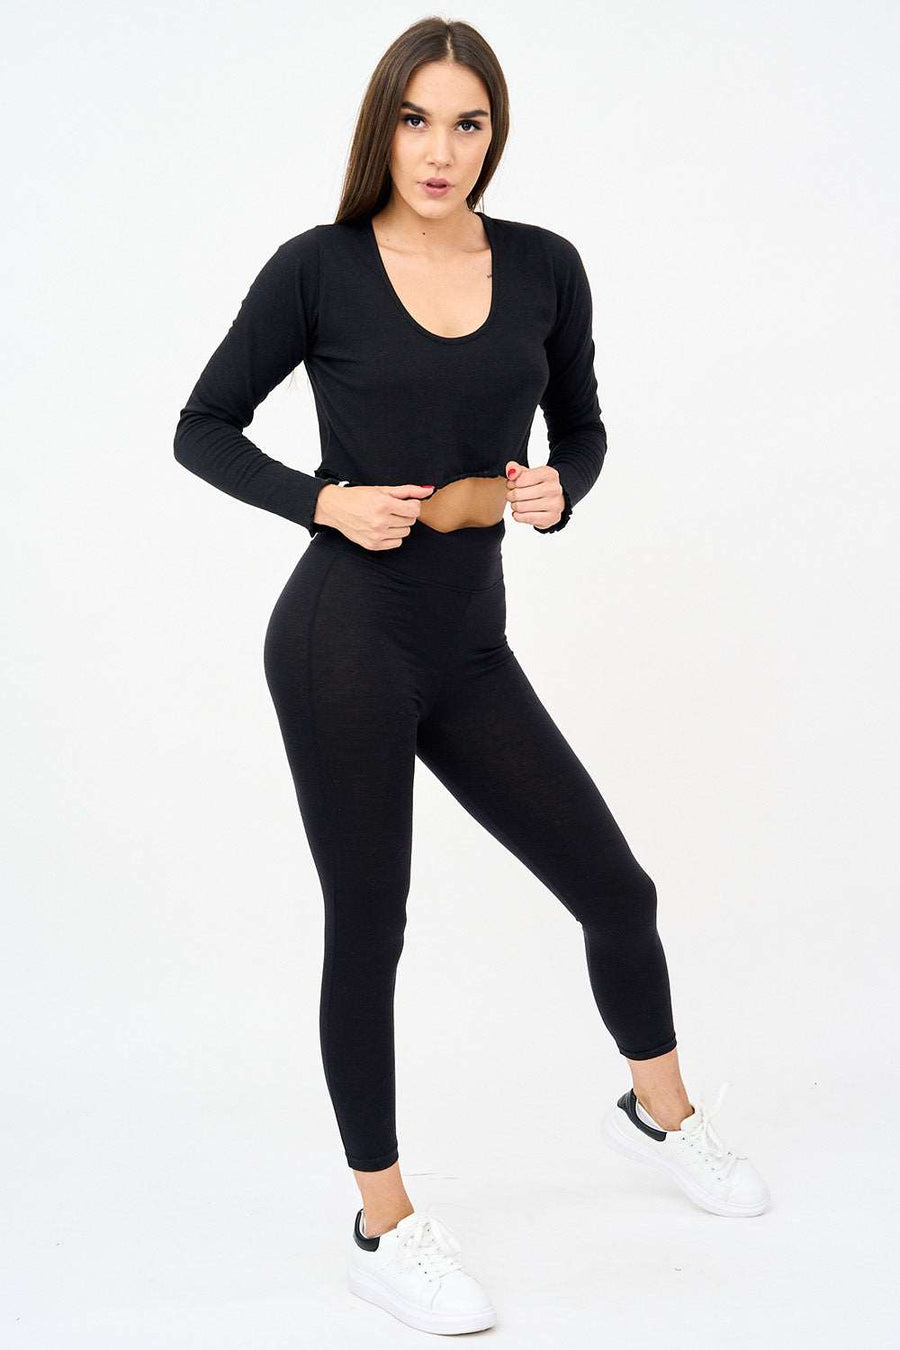 Buttery Soft Yoga Pants for Women!